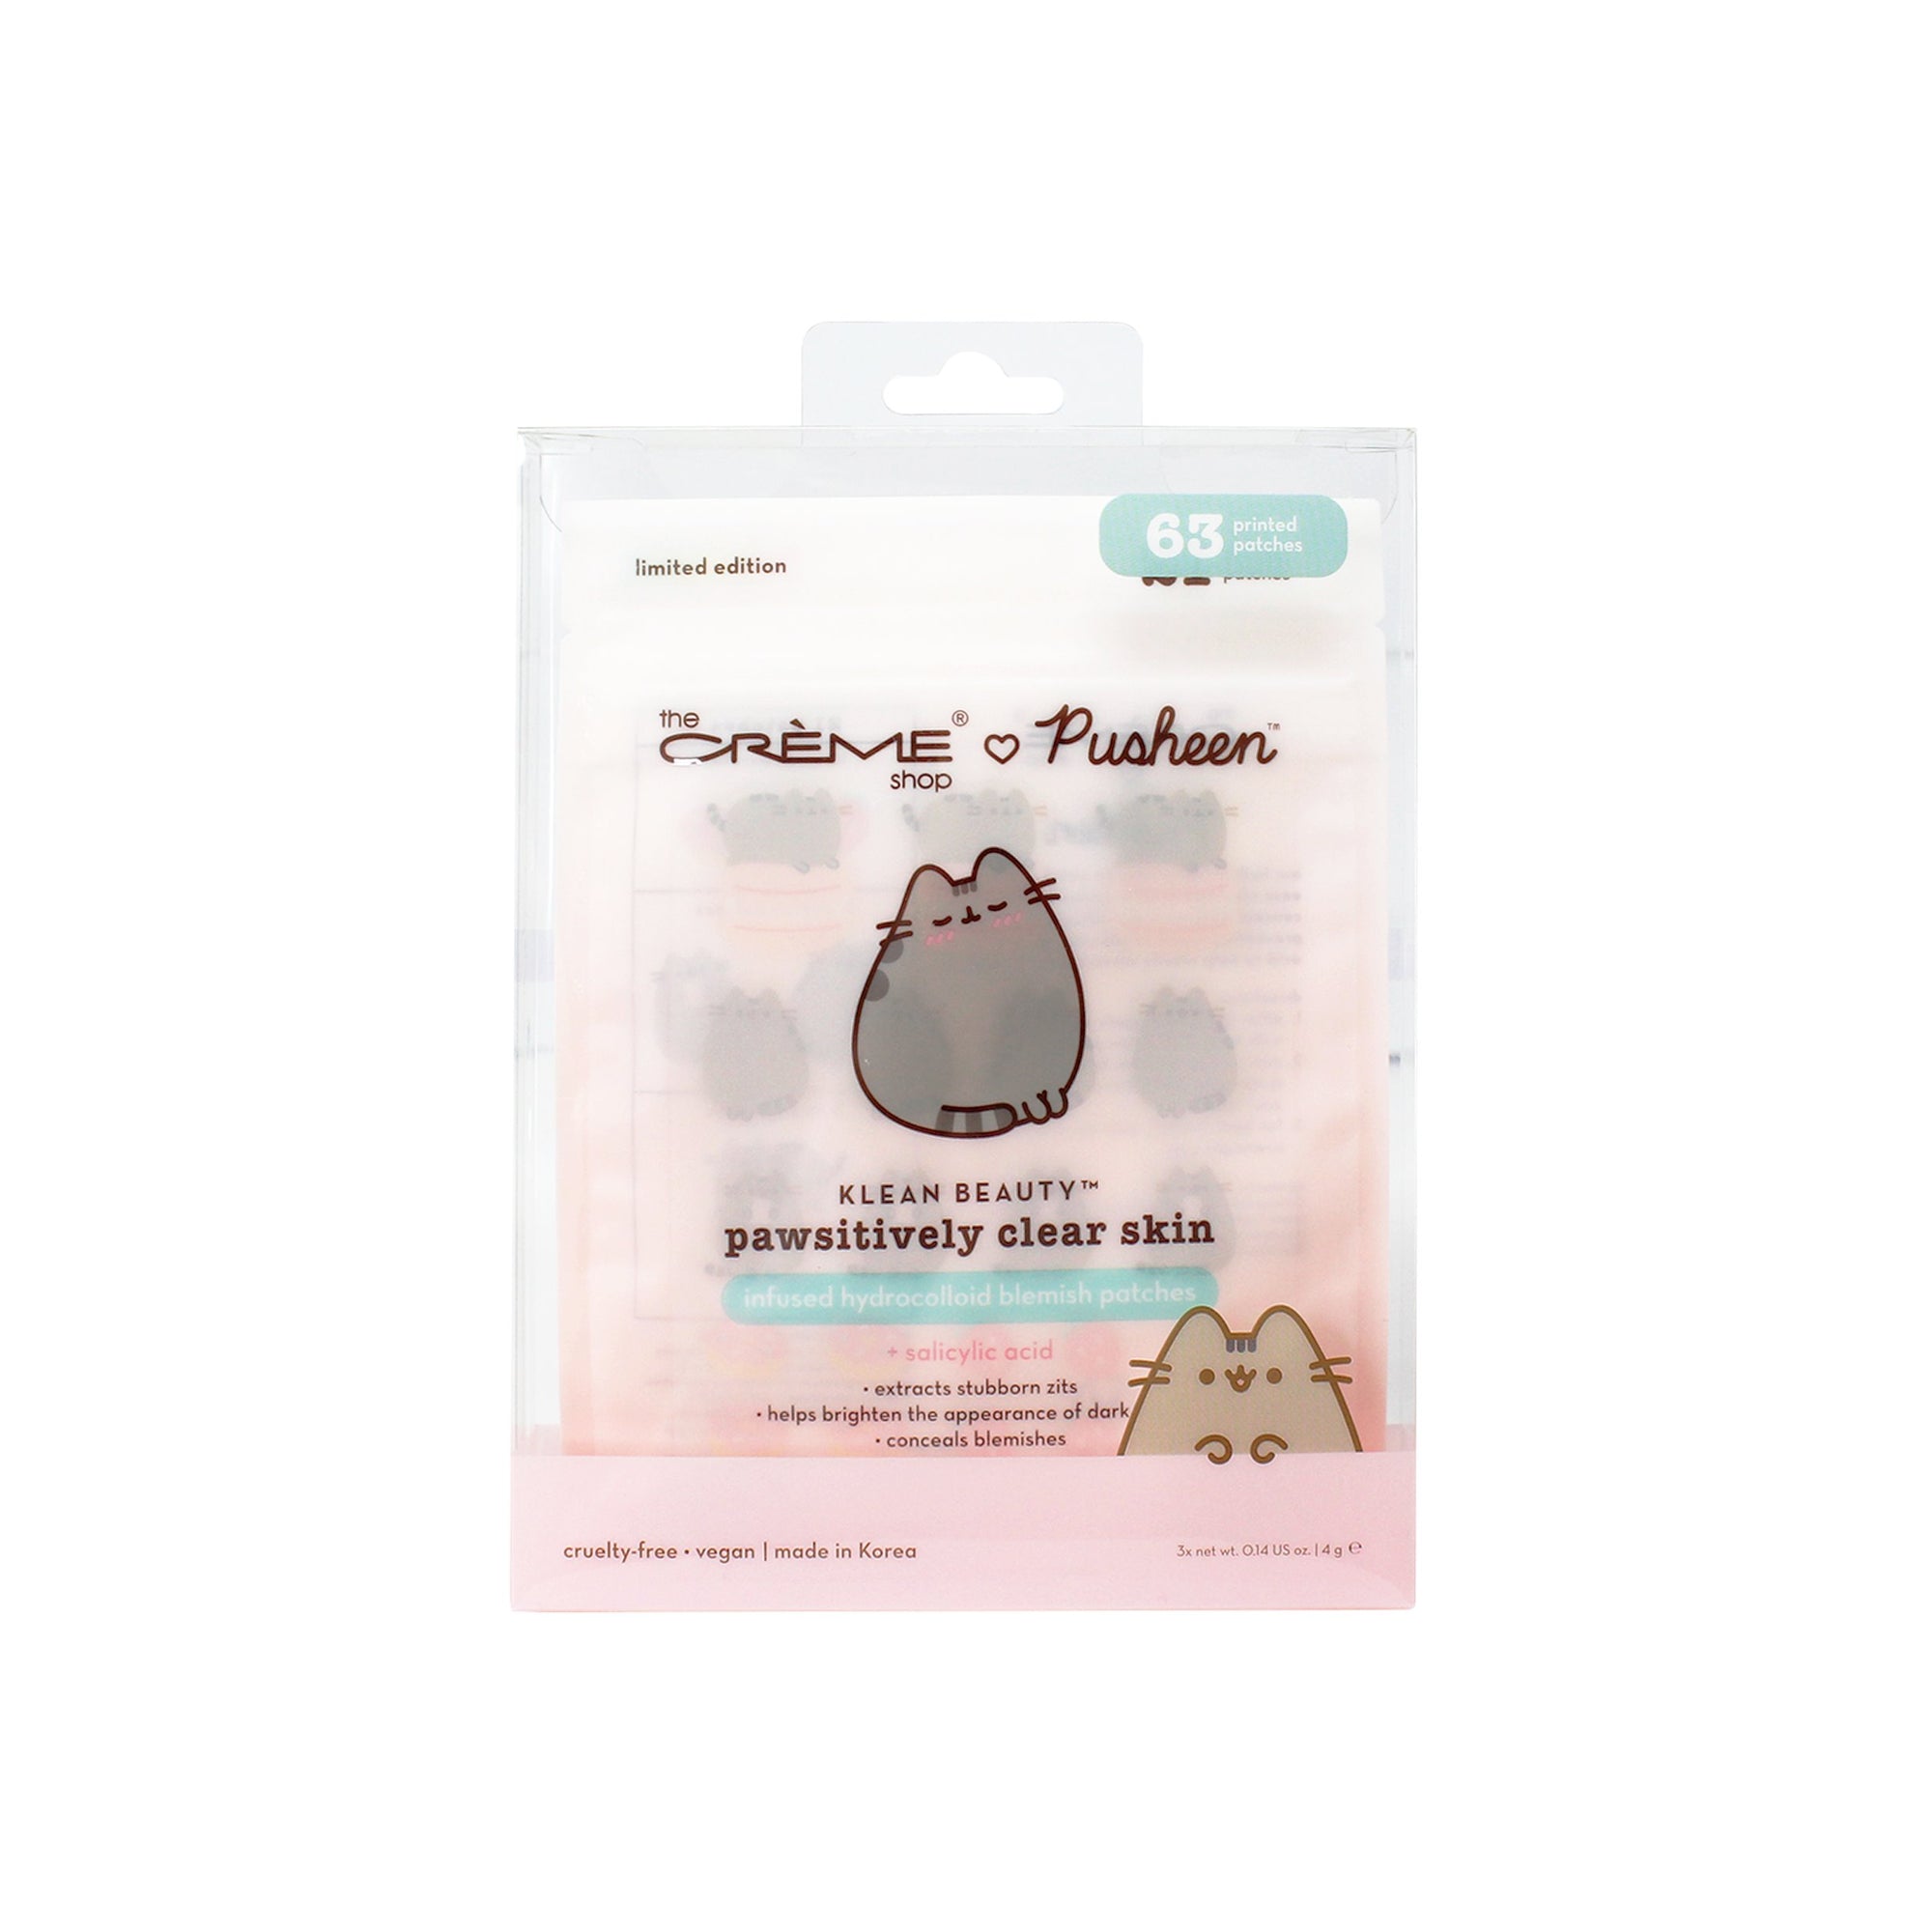 Pusheen Klean Beauty™ Pawsitively Clear Skin Infused Hydrocolloid Blemish Patches Hydrocolloid Acne Patches The Crème Shop x Pusheen 